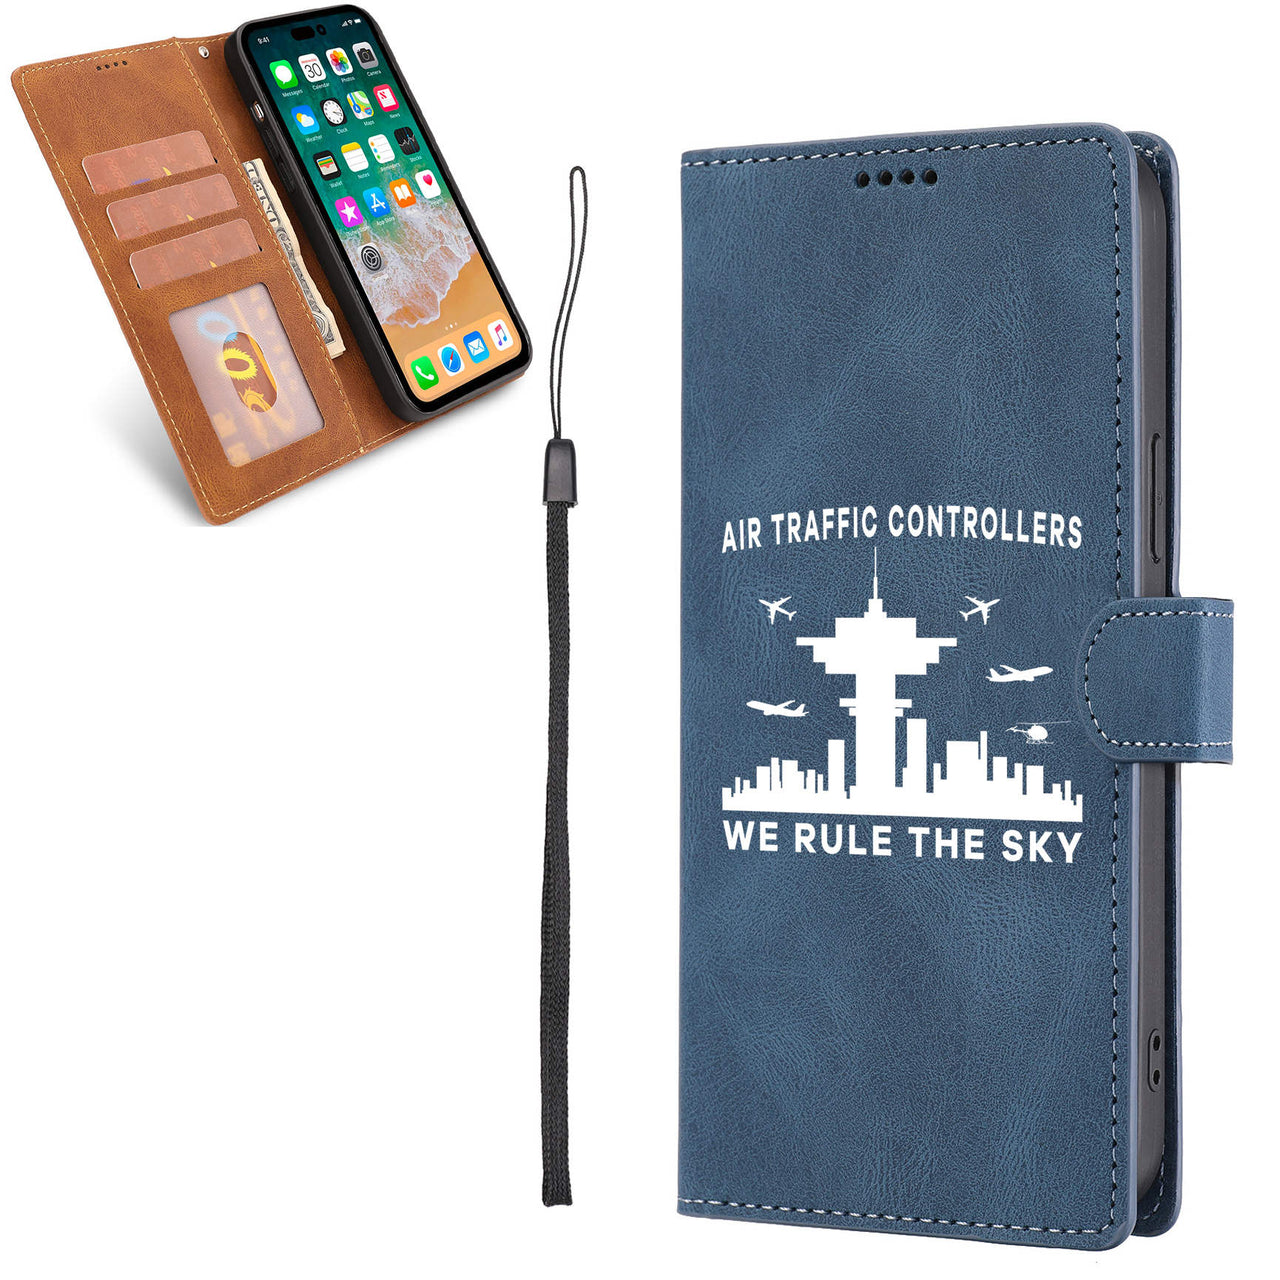 Air Traffic Controllers - We Rule The Sky Designed Leather iPhone Cases